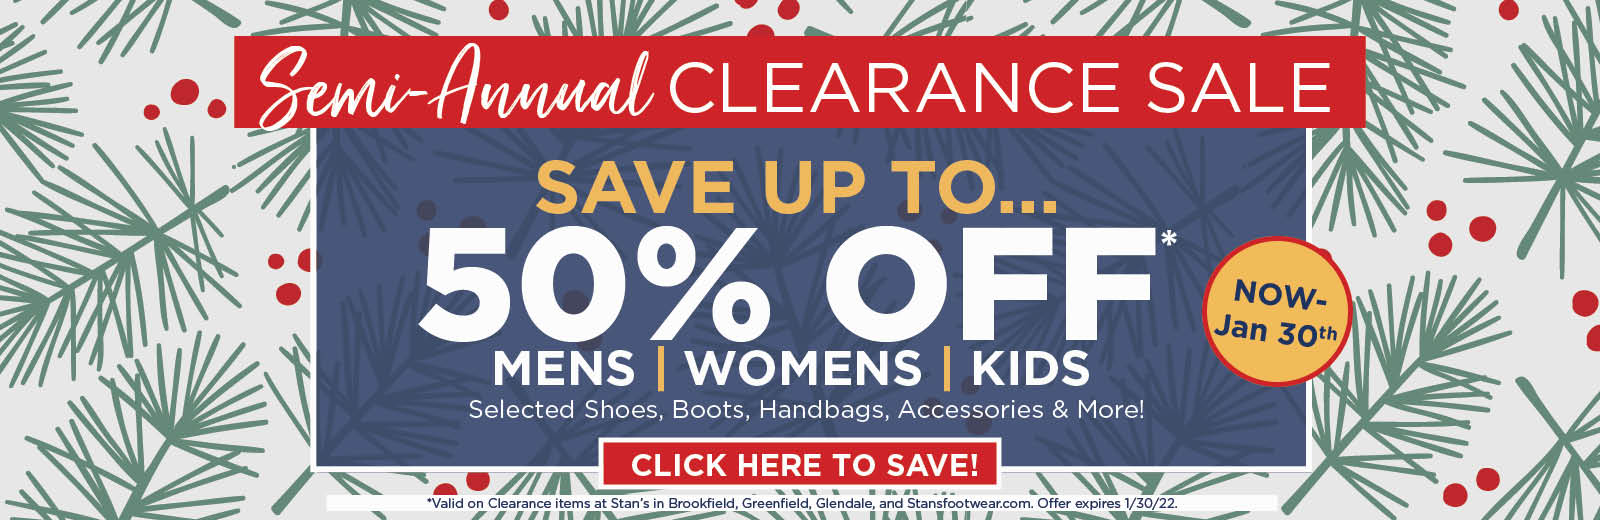 Semi Annual Clearance Sale - Save Up to 50% off